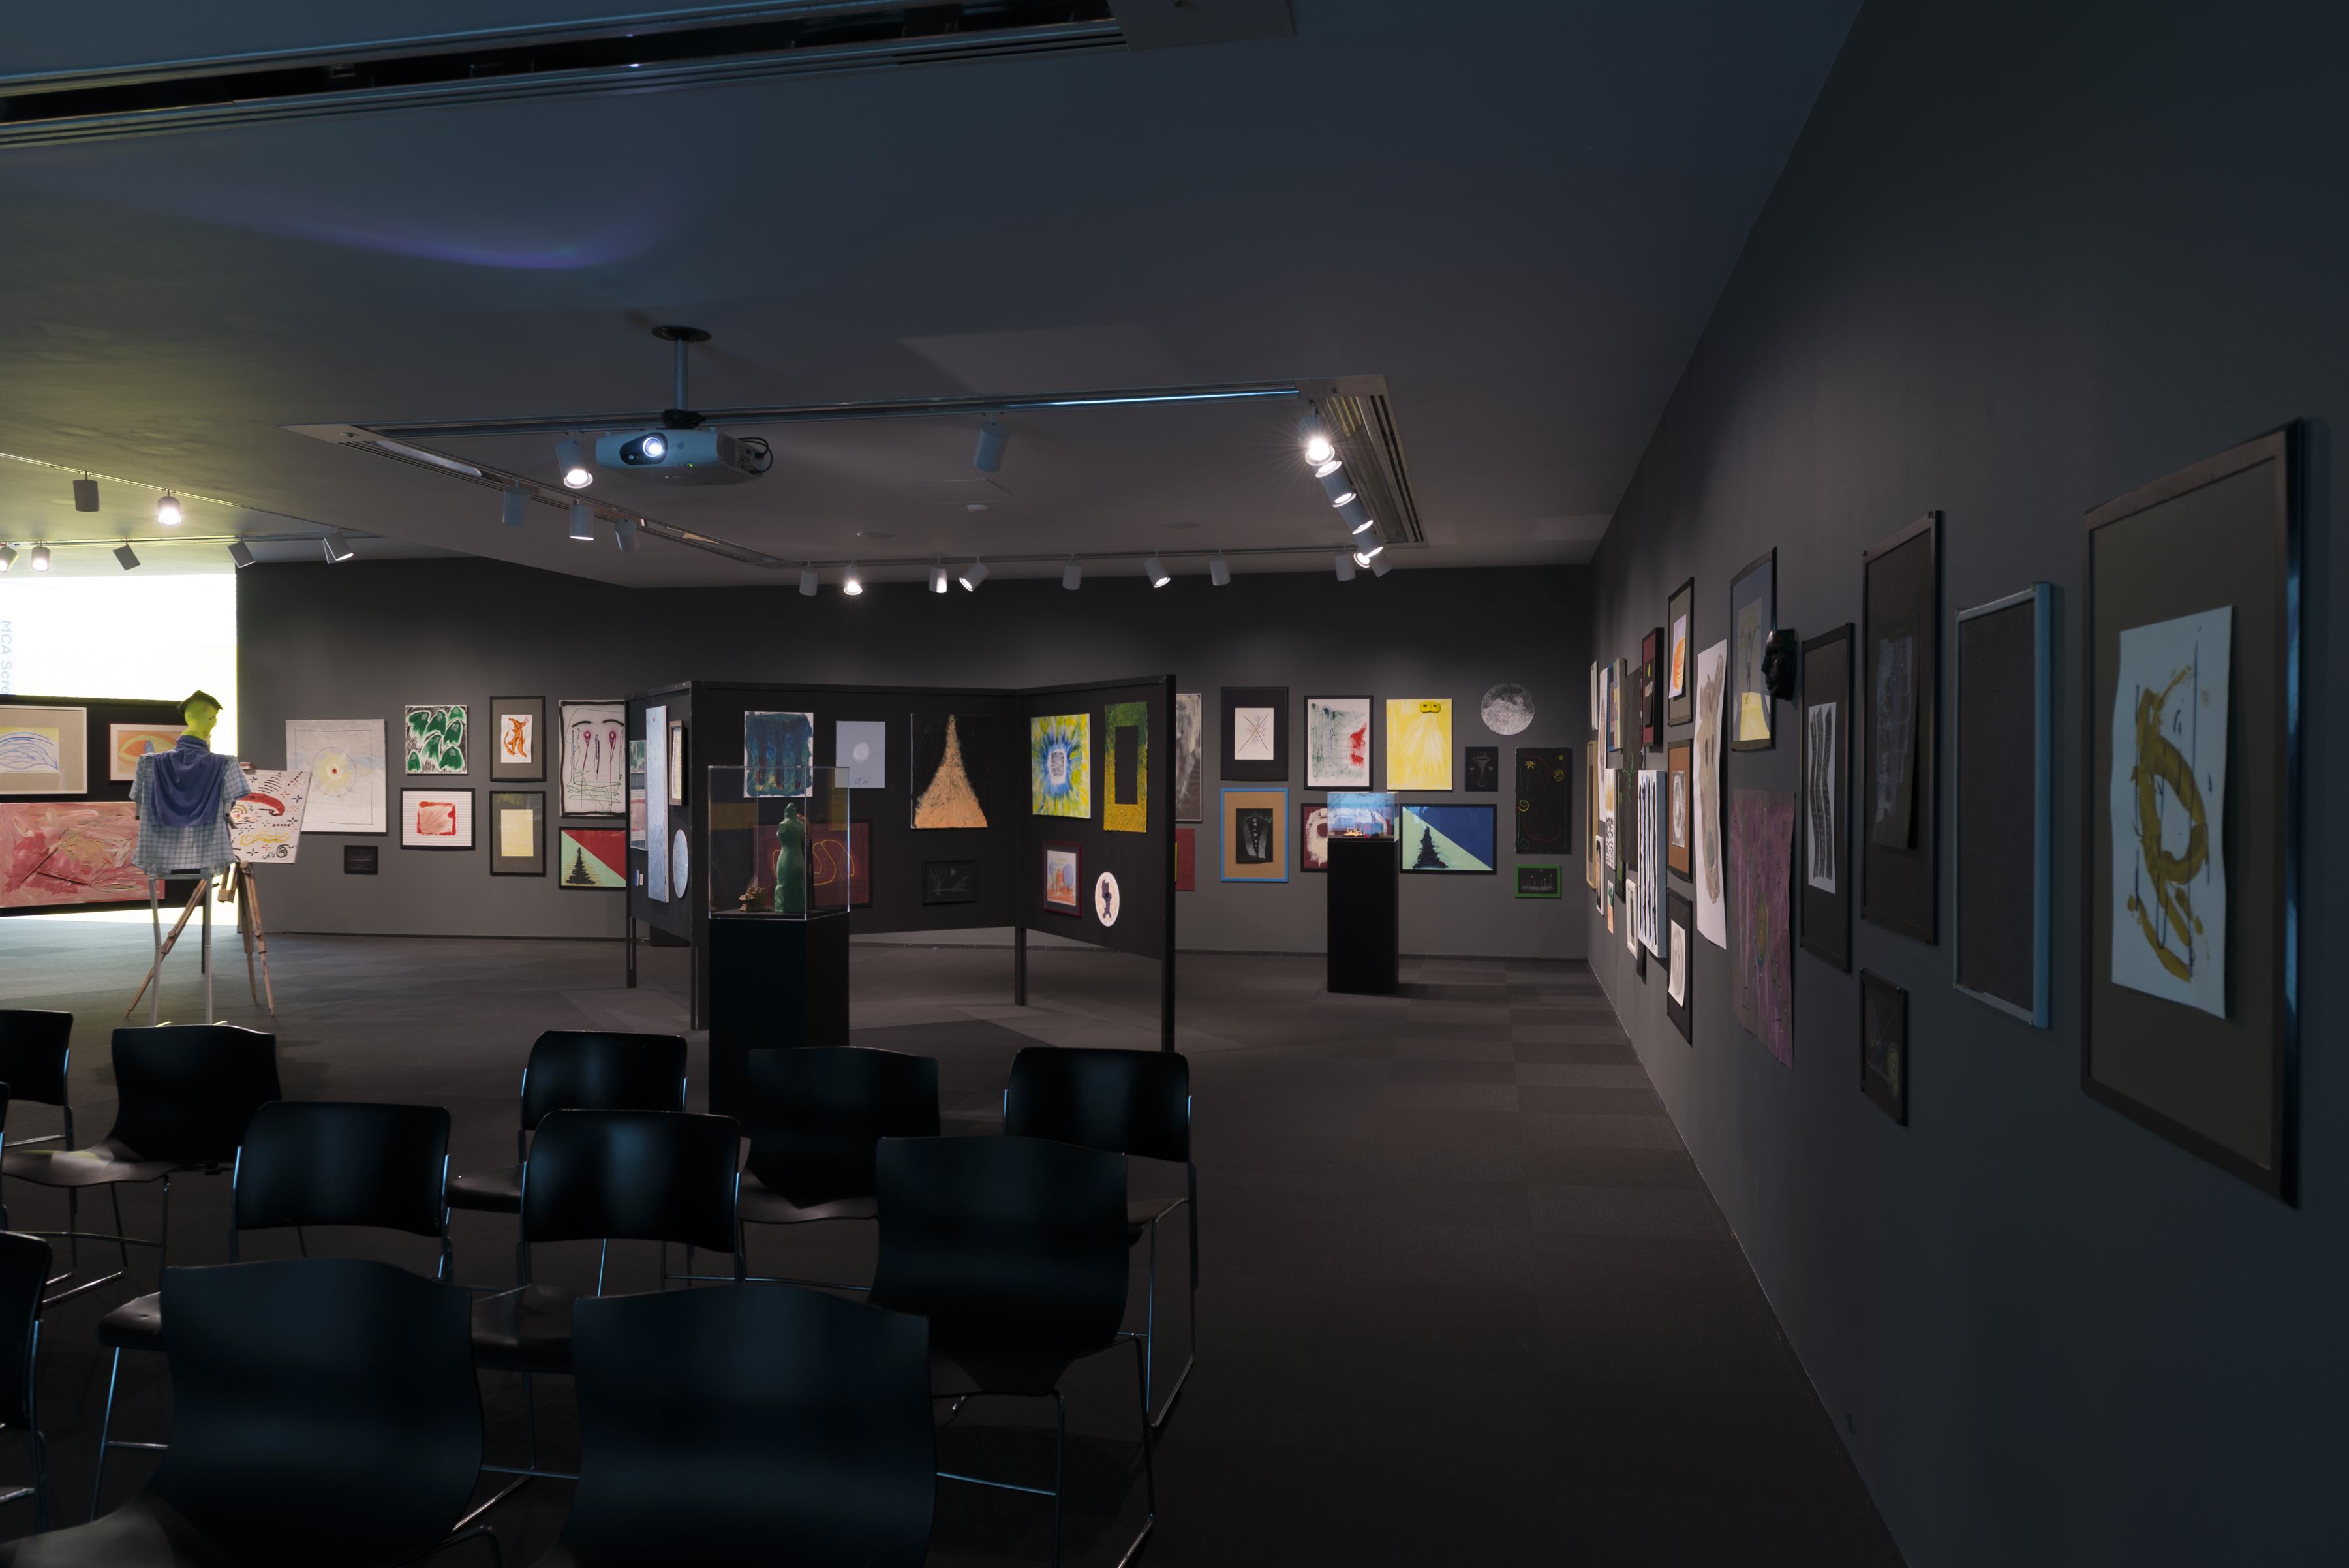 Installation view of paintings and sculptures in a grey gallery, rows of chairs in the foreground, and a humanoid figure on the left standing at an easel and canvas